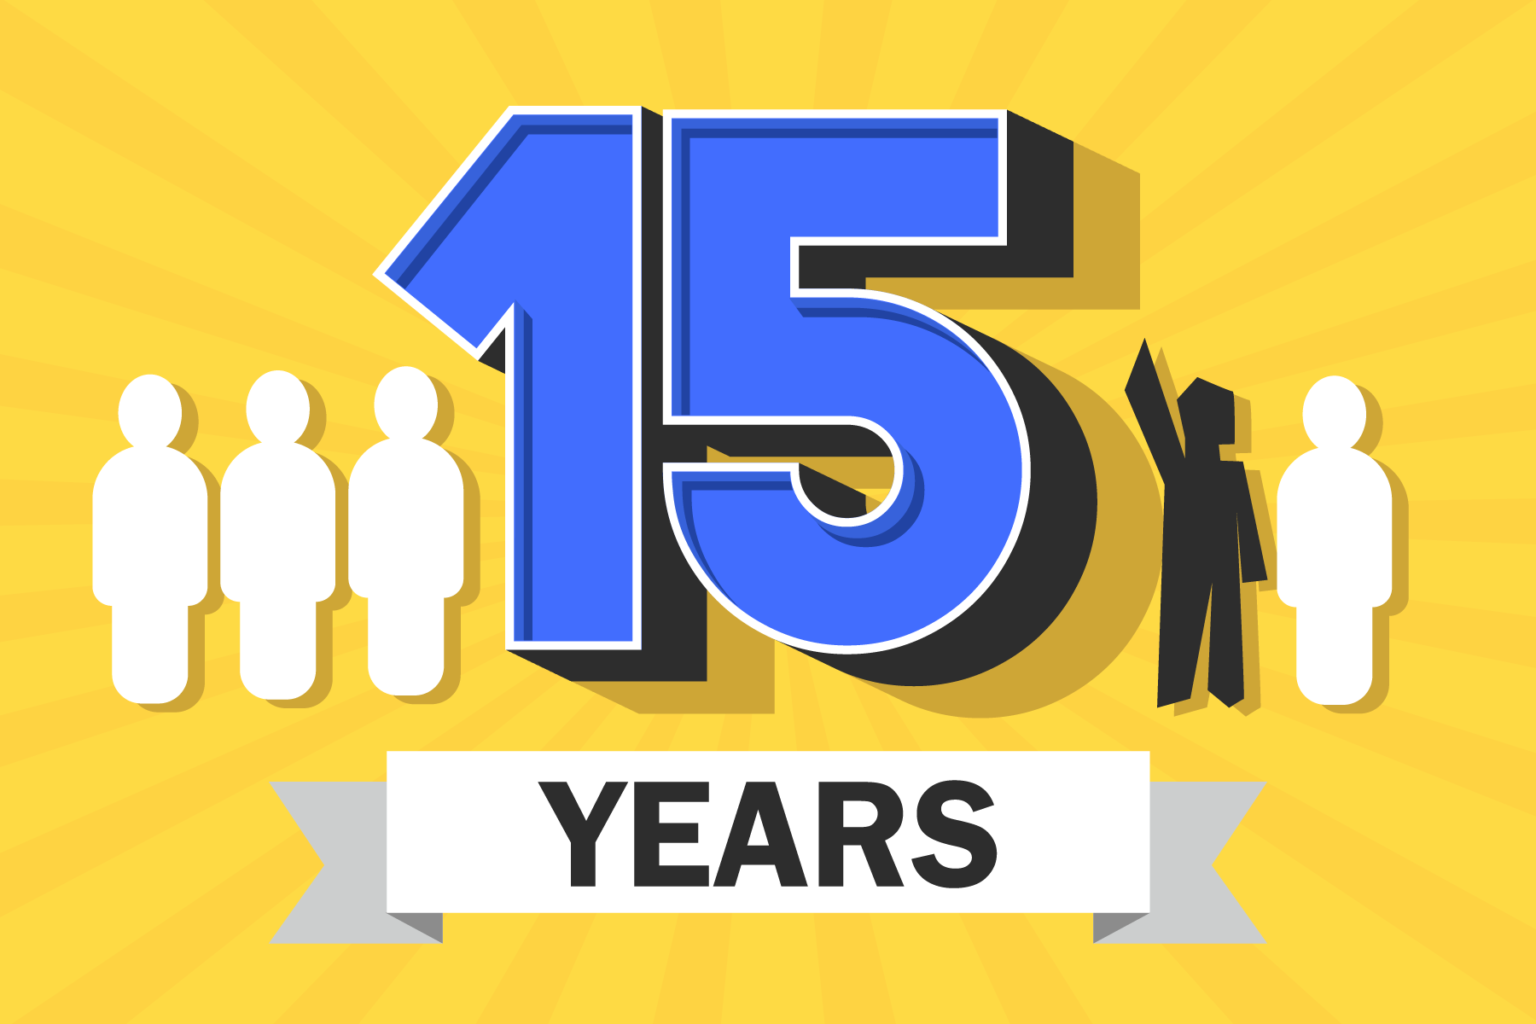 15 years with four stylized people on a yellow background